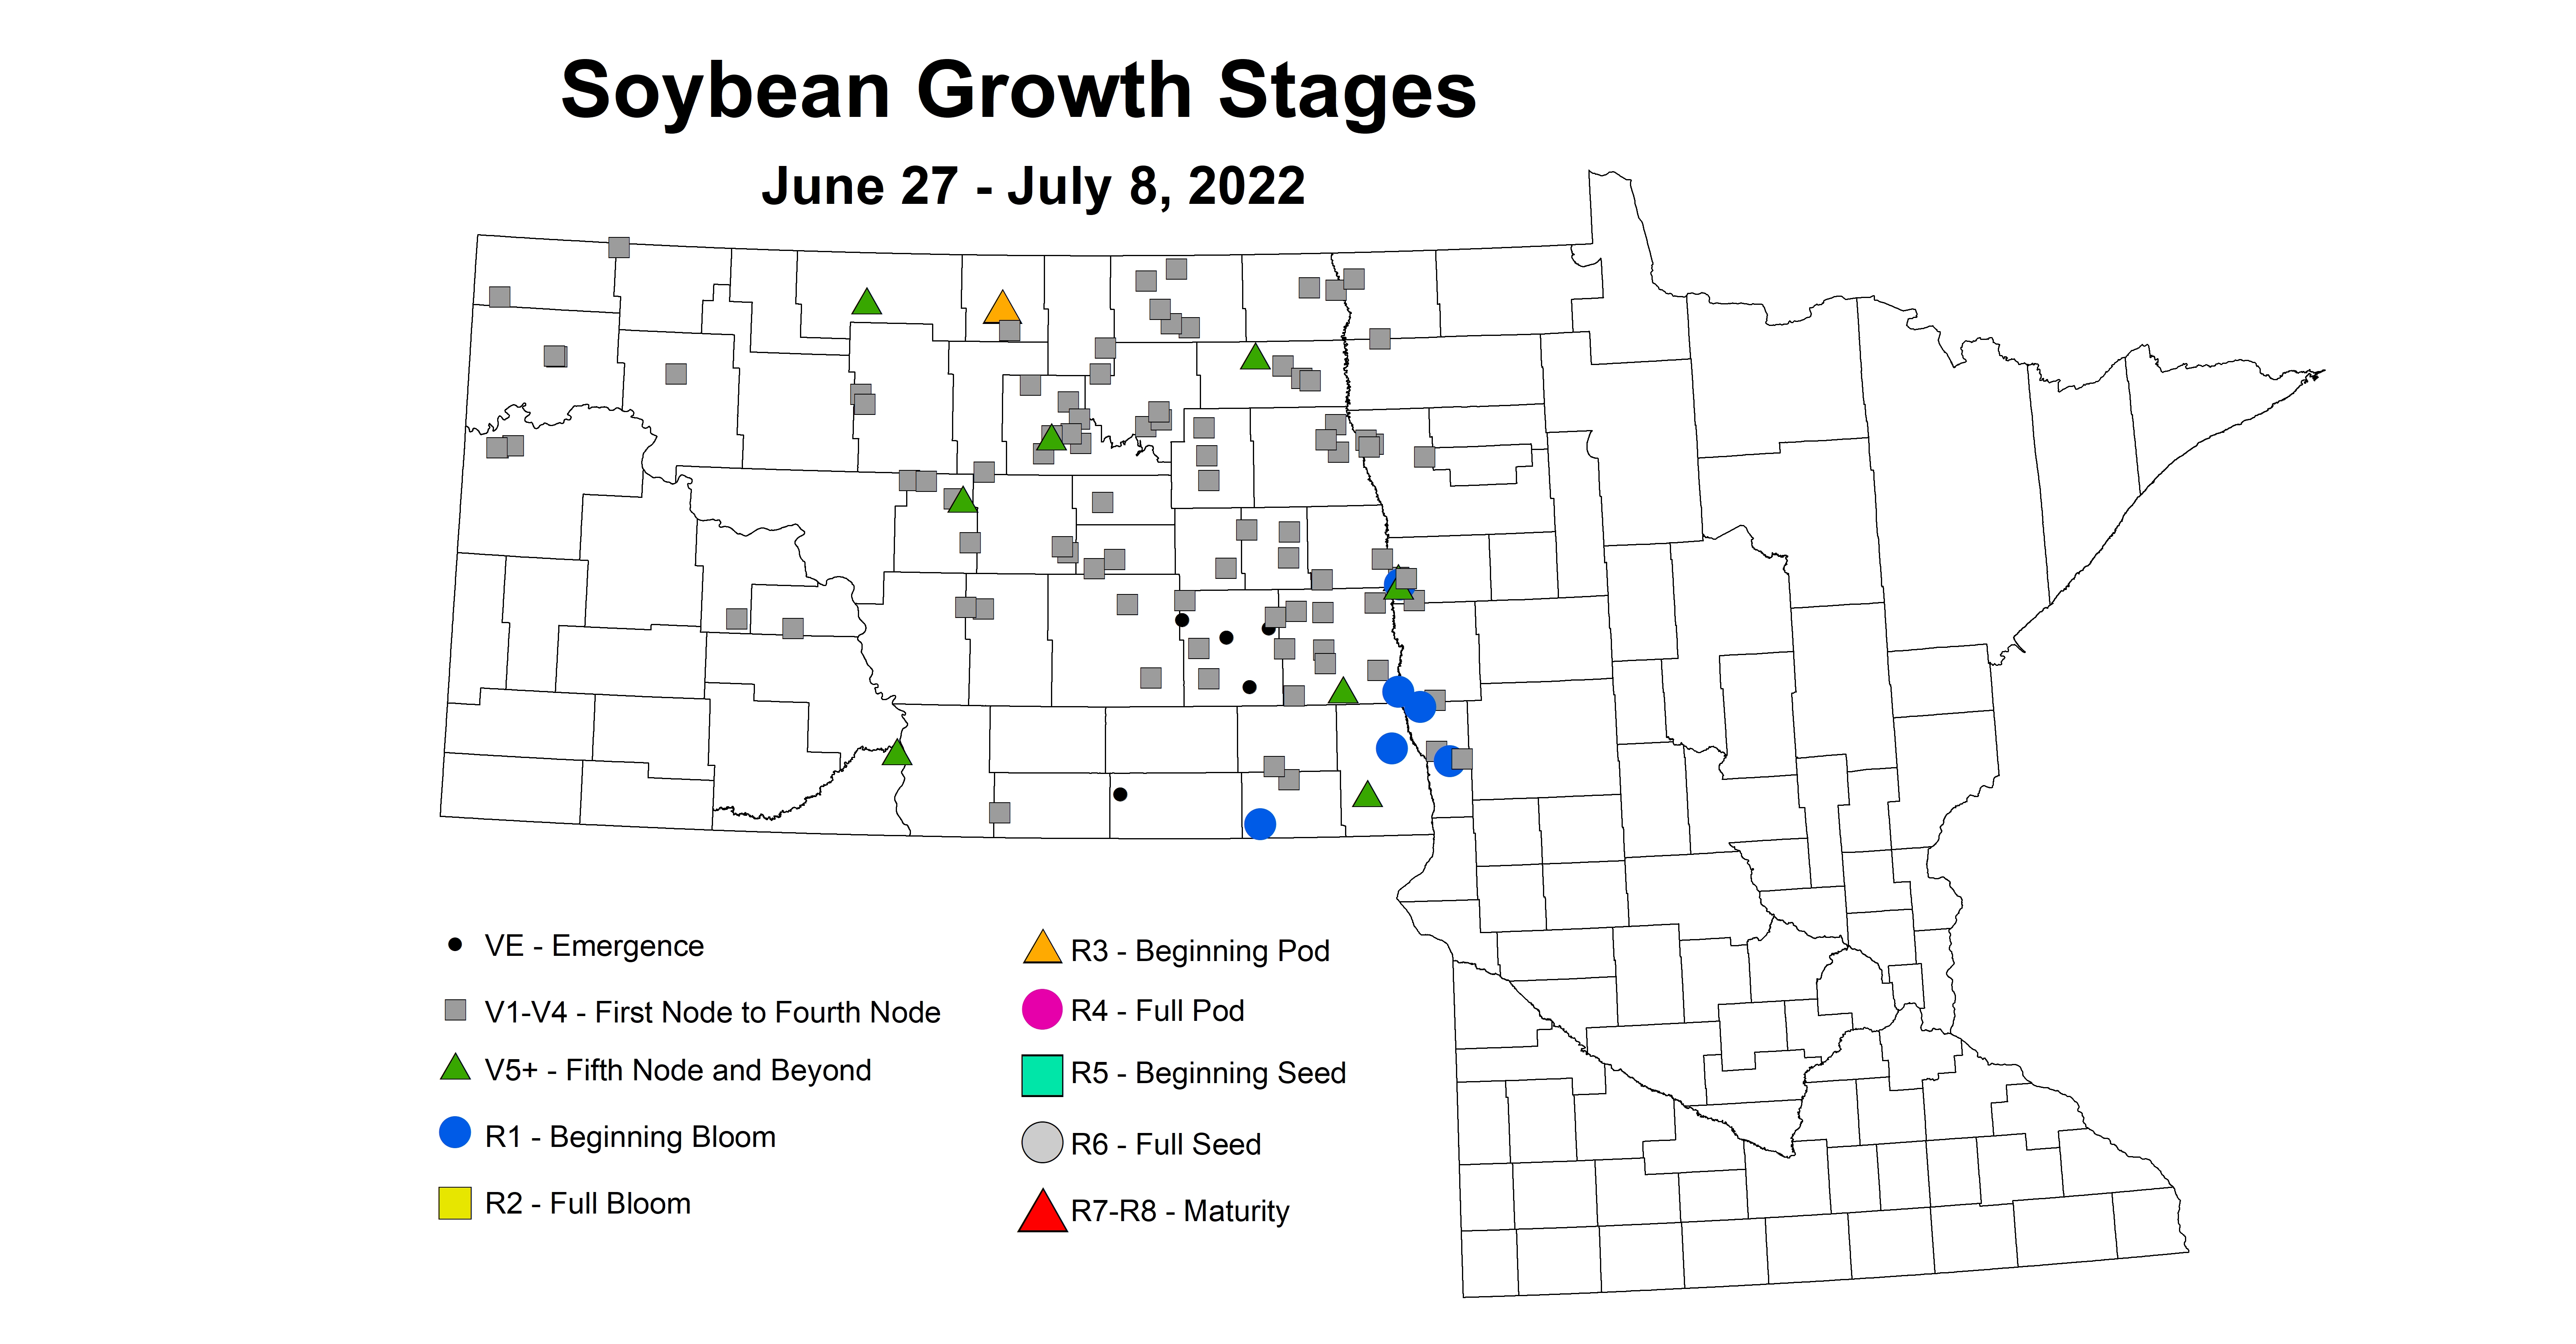 ND IPM map of soybean growth stages June 27 - July 8 2022